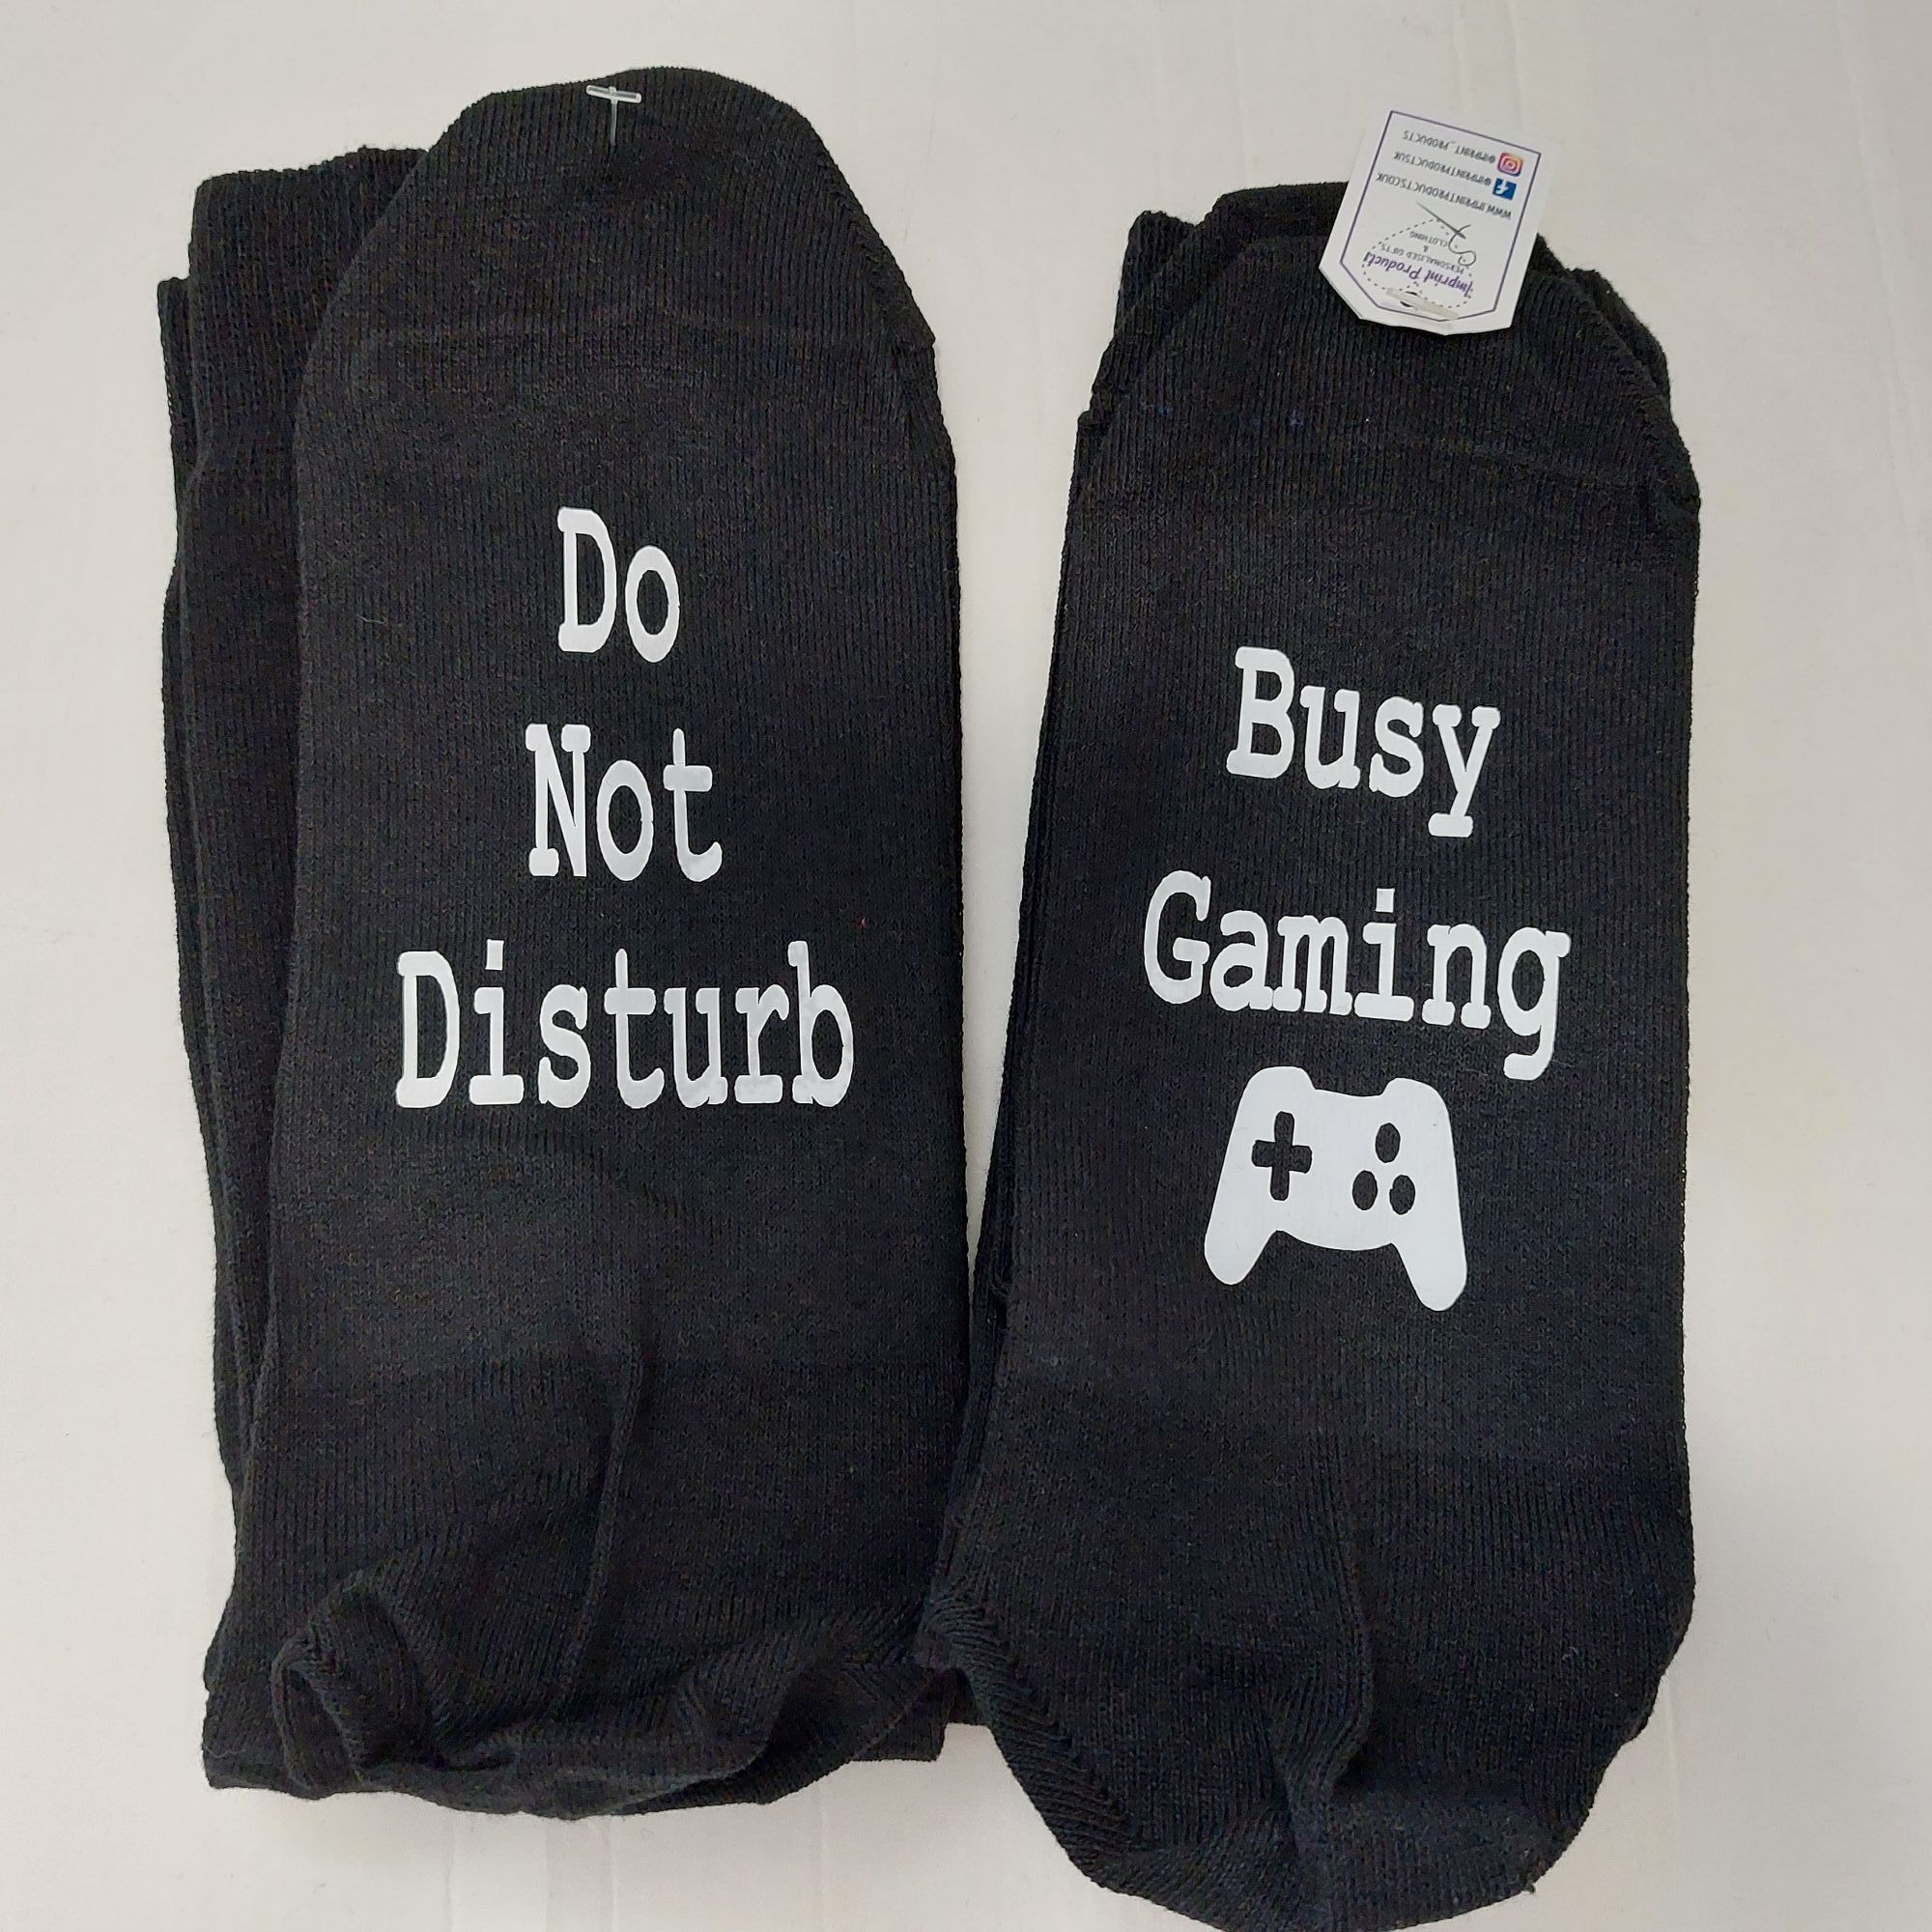 Busy Gaming Do Not Disturb Gaming Socks, Gift for Gamers